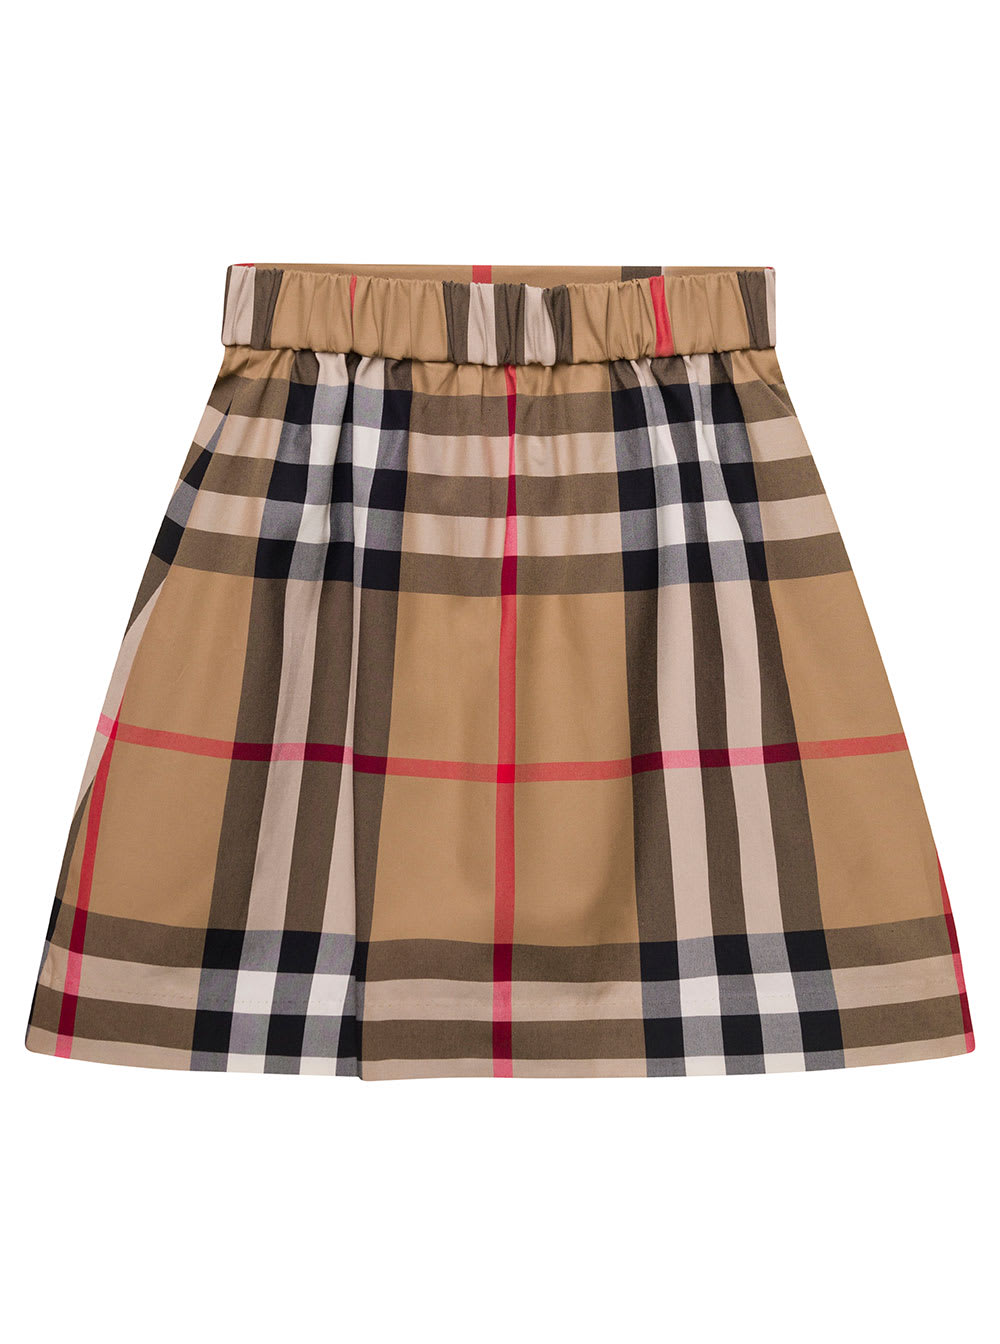 BURBERRY ANJELICA BEIGE MINI SKIRT WITH VINTAGE CHECK MOTIF IN COTTON GIRL